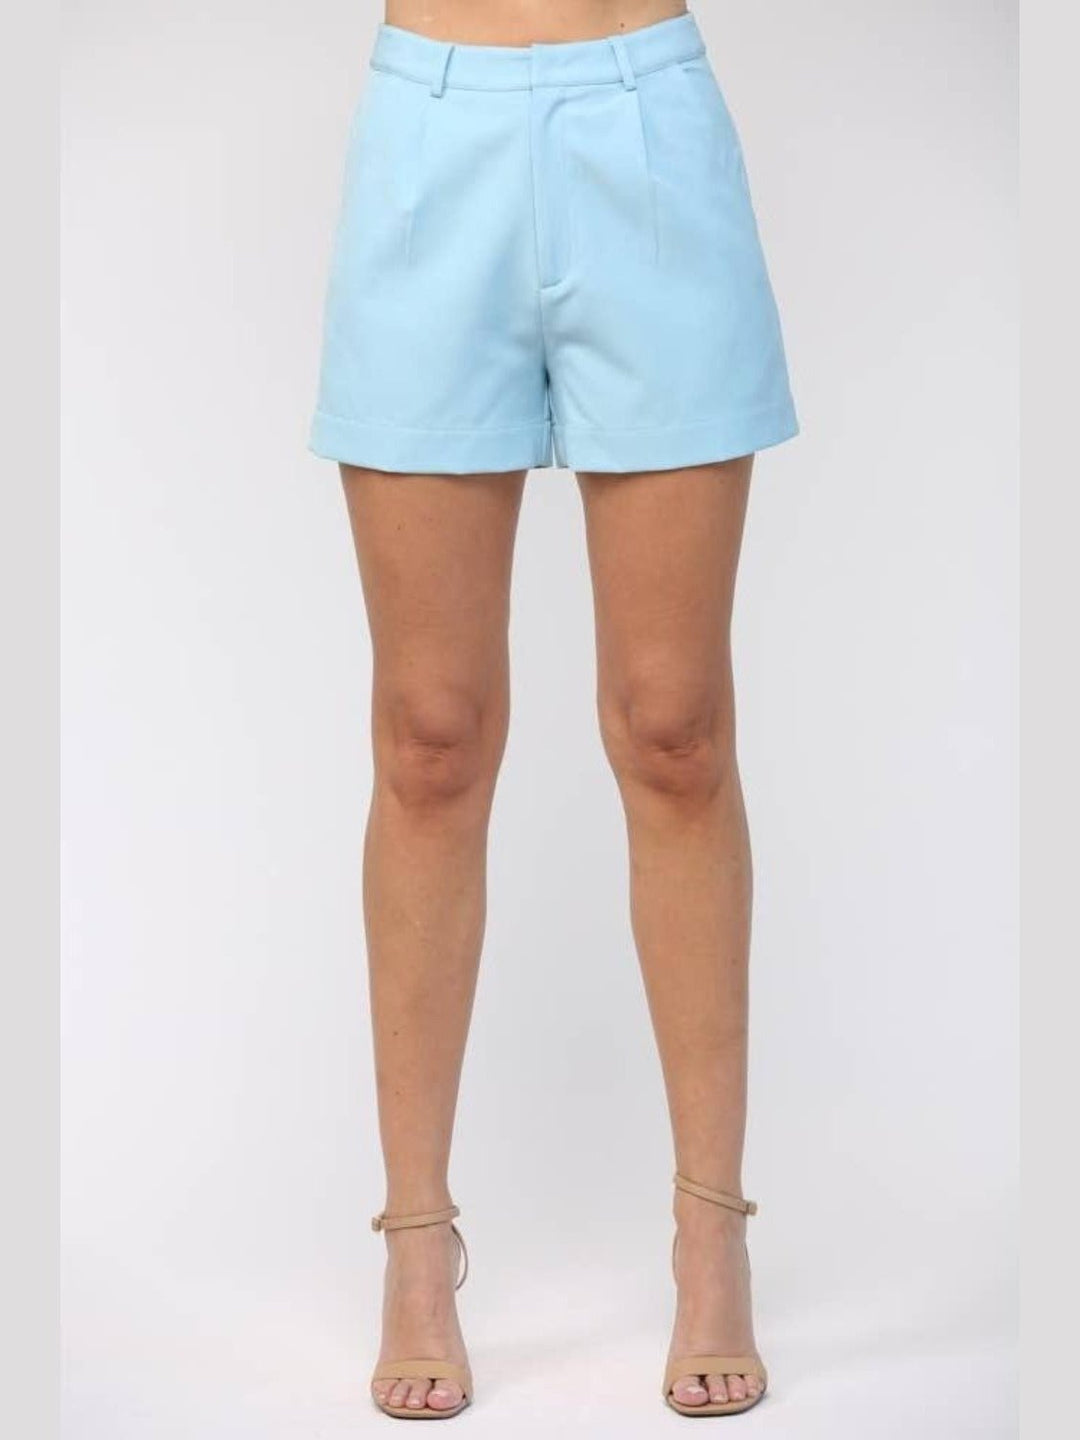 Tailored Sky Blue Shorts with Side Pockets - Lolo Viv Boutique